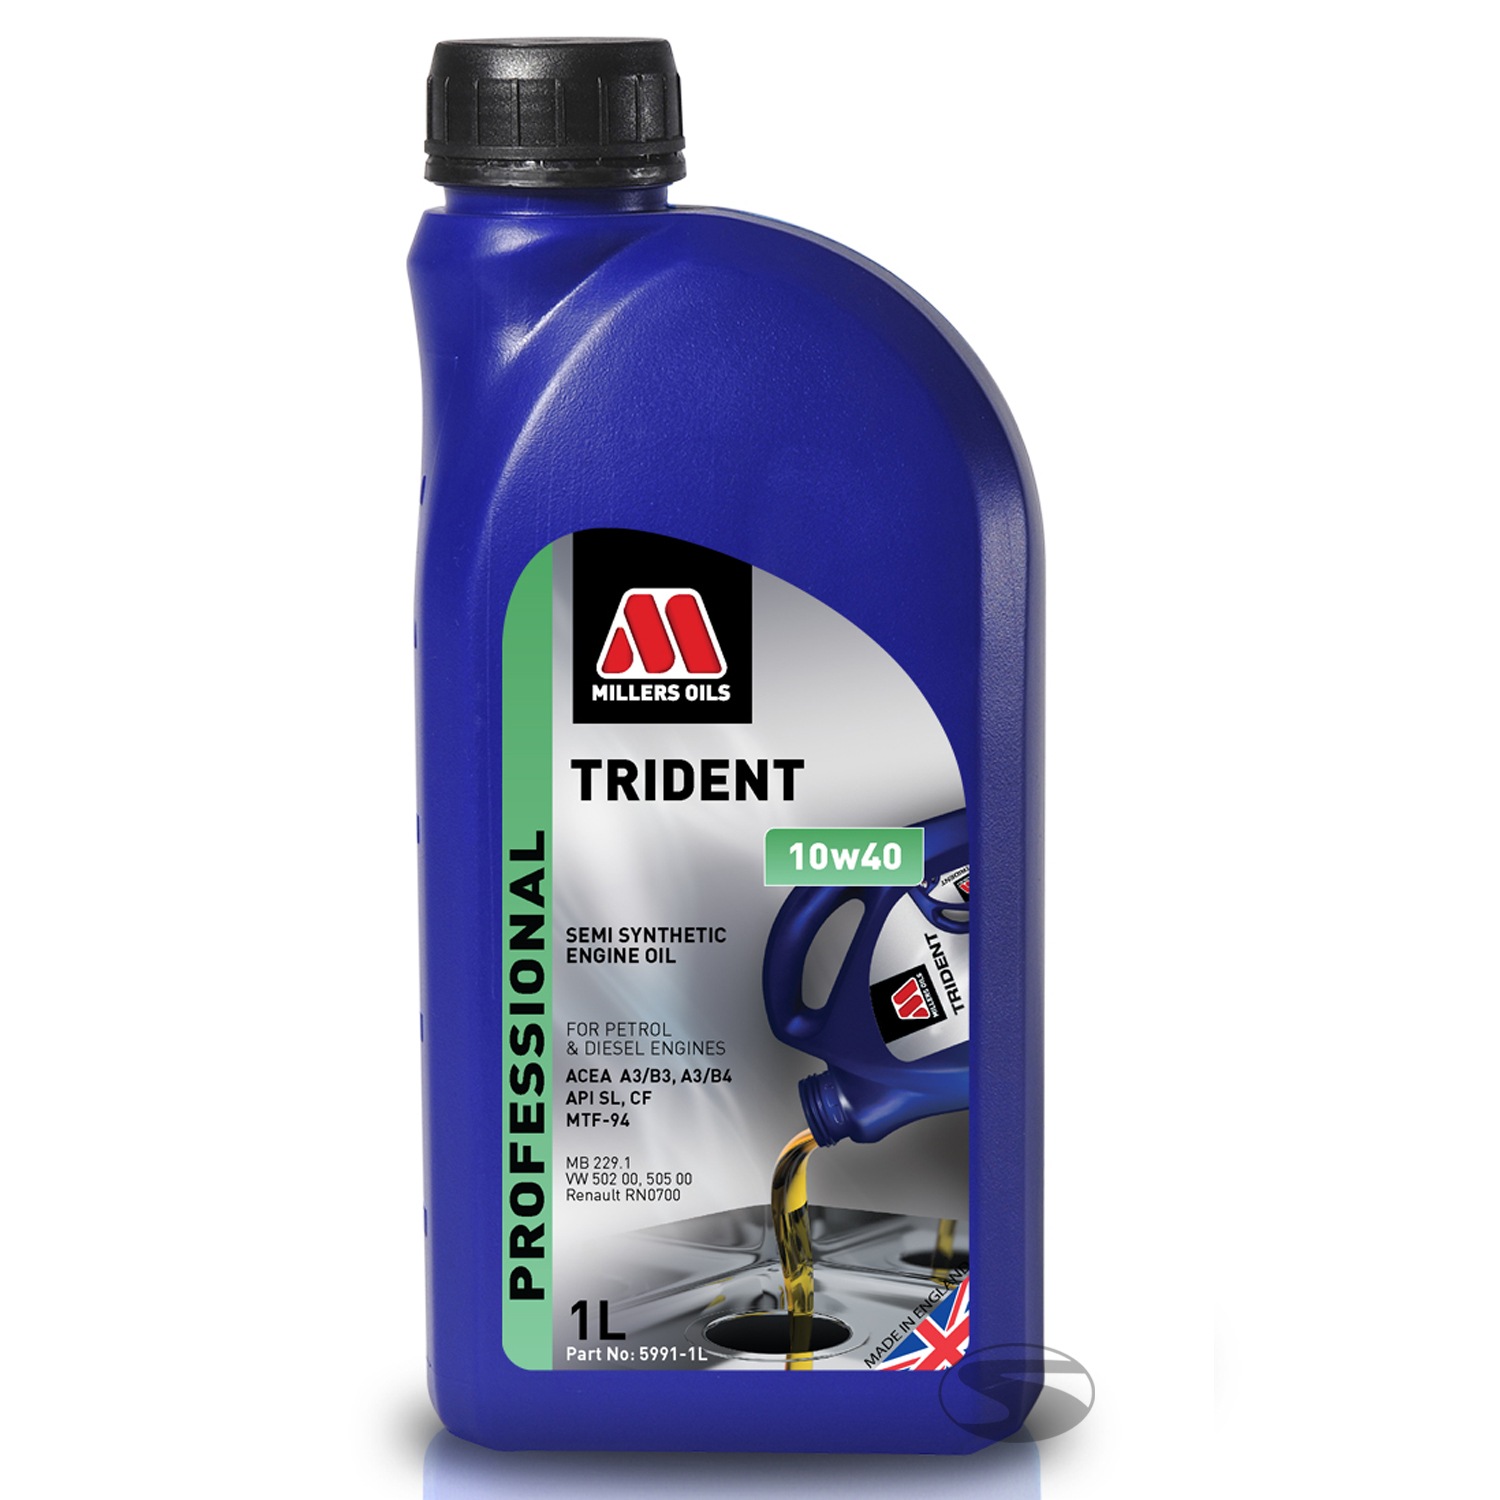 Millers Oils Trident 10W40 Semi Synthetic_1 Liter_150174